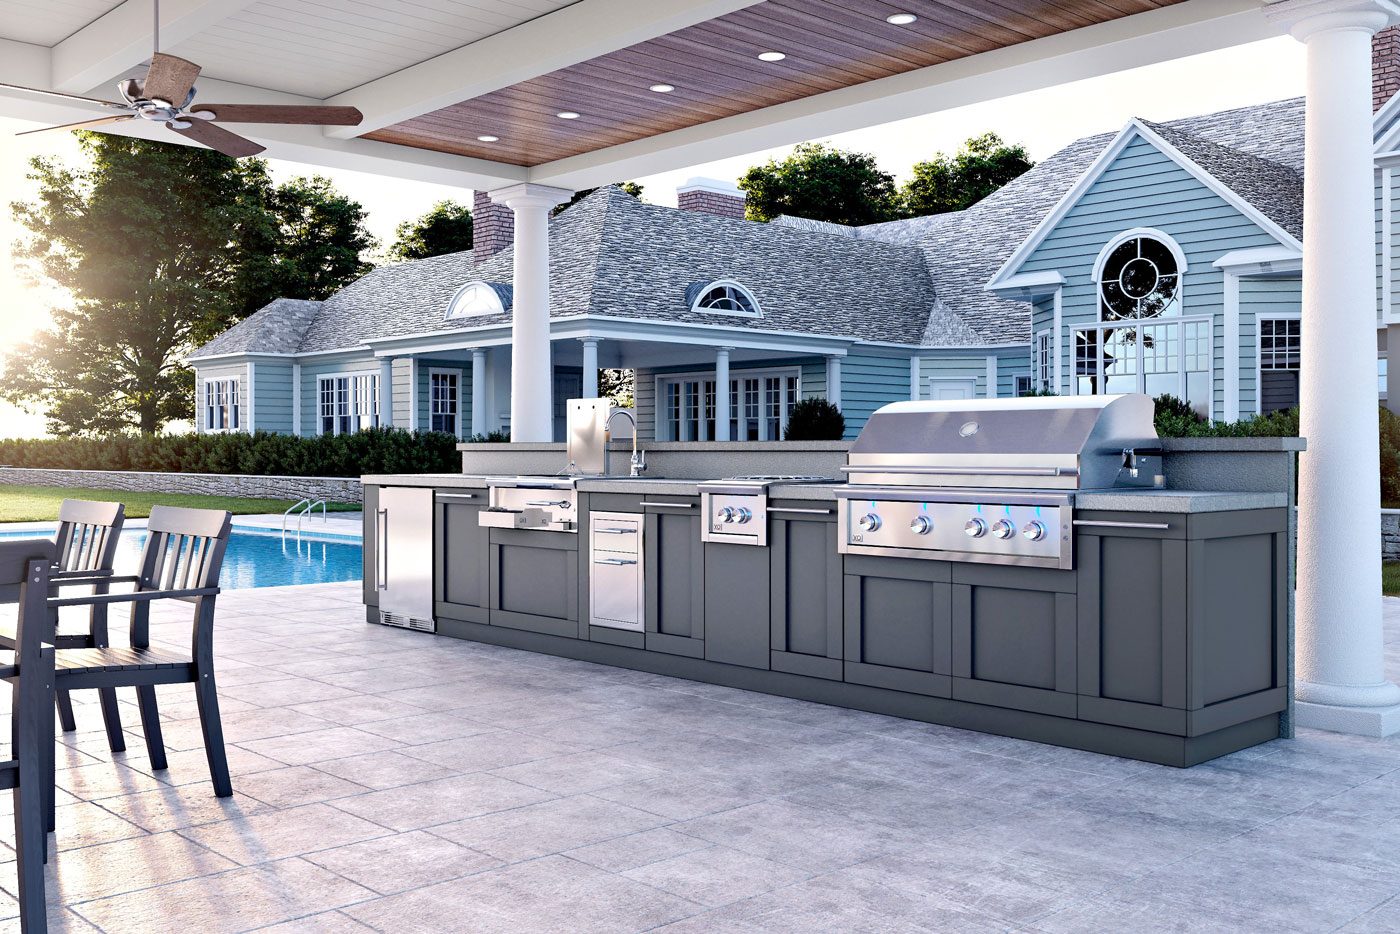 Outdoor kitchen in backyard next to pool